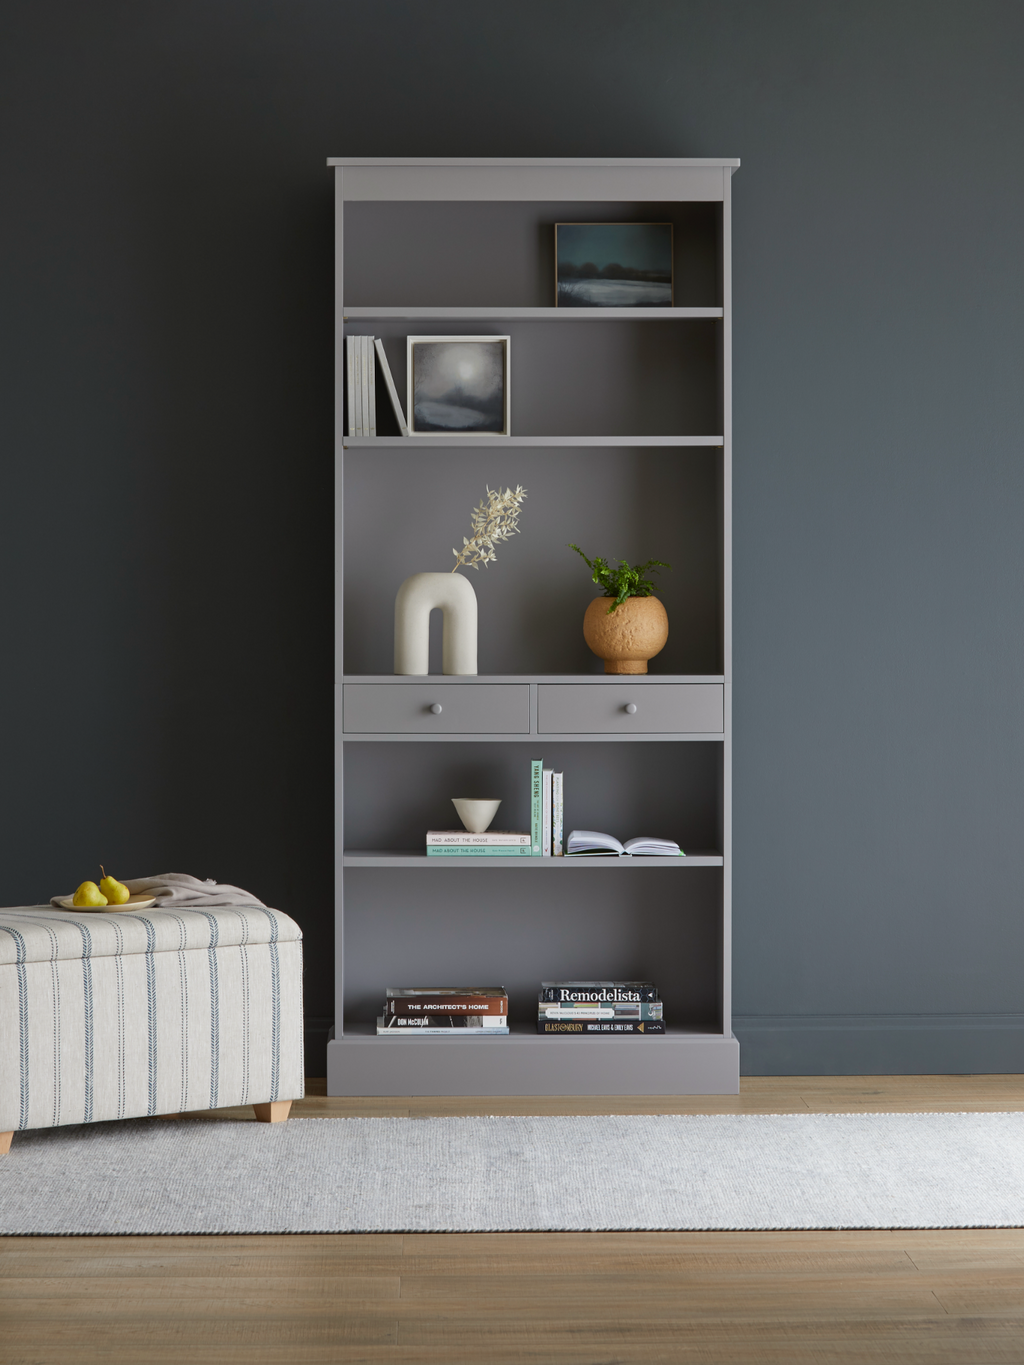 Design Your Own Modular Wall Storage Units – The Dormy House